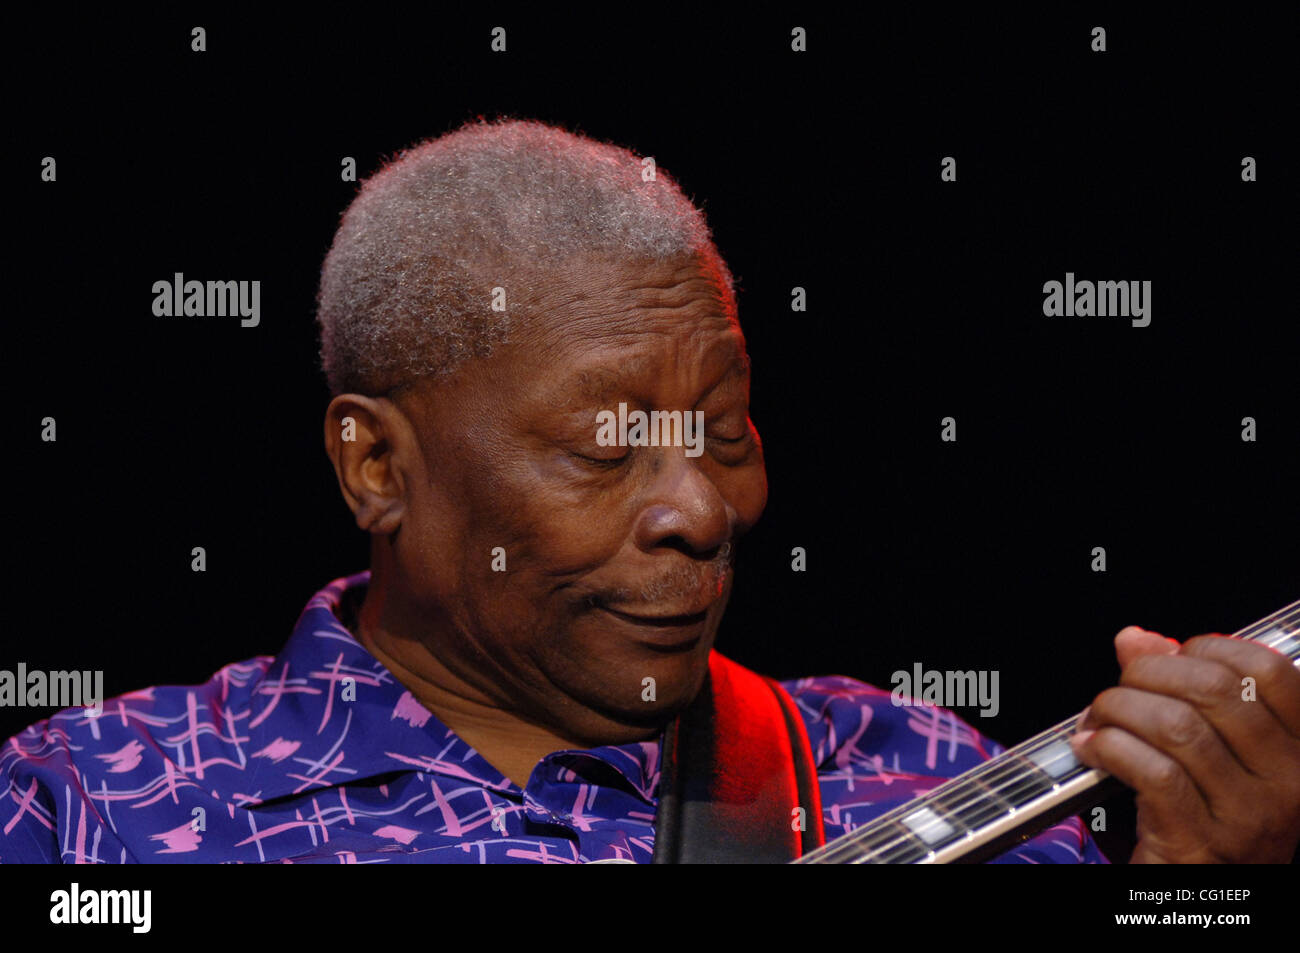 Aug 10, 2007 - Portsmouth, VA, USA - Bluse legend and multi Grammy winner B.B. KING brings the blues out on a hot August night at the Netelos Pavilion. (Credit Image: © Jeff Moore/ZUMA Press) Stock Photo